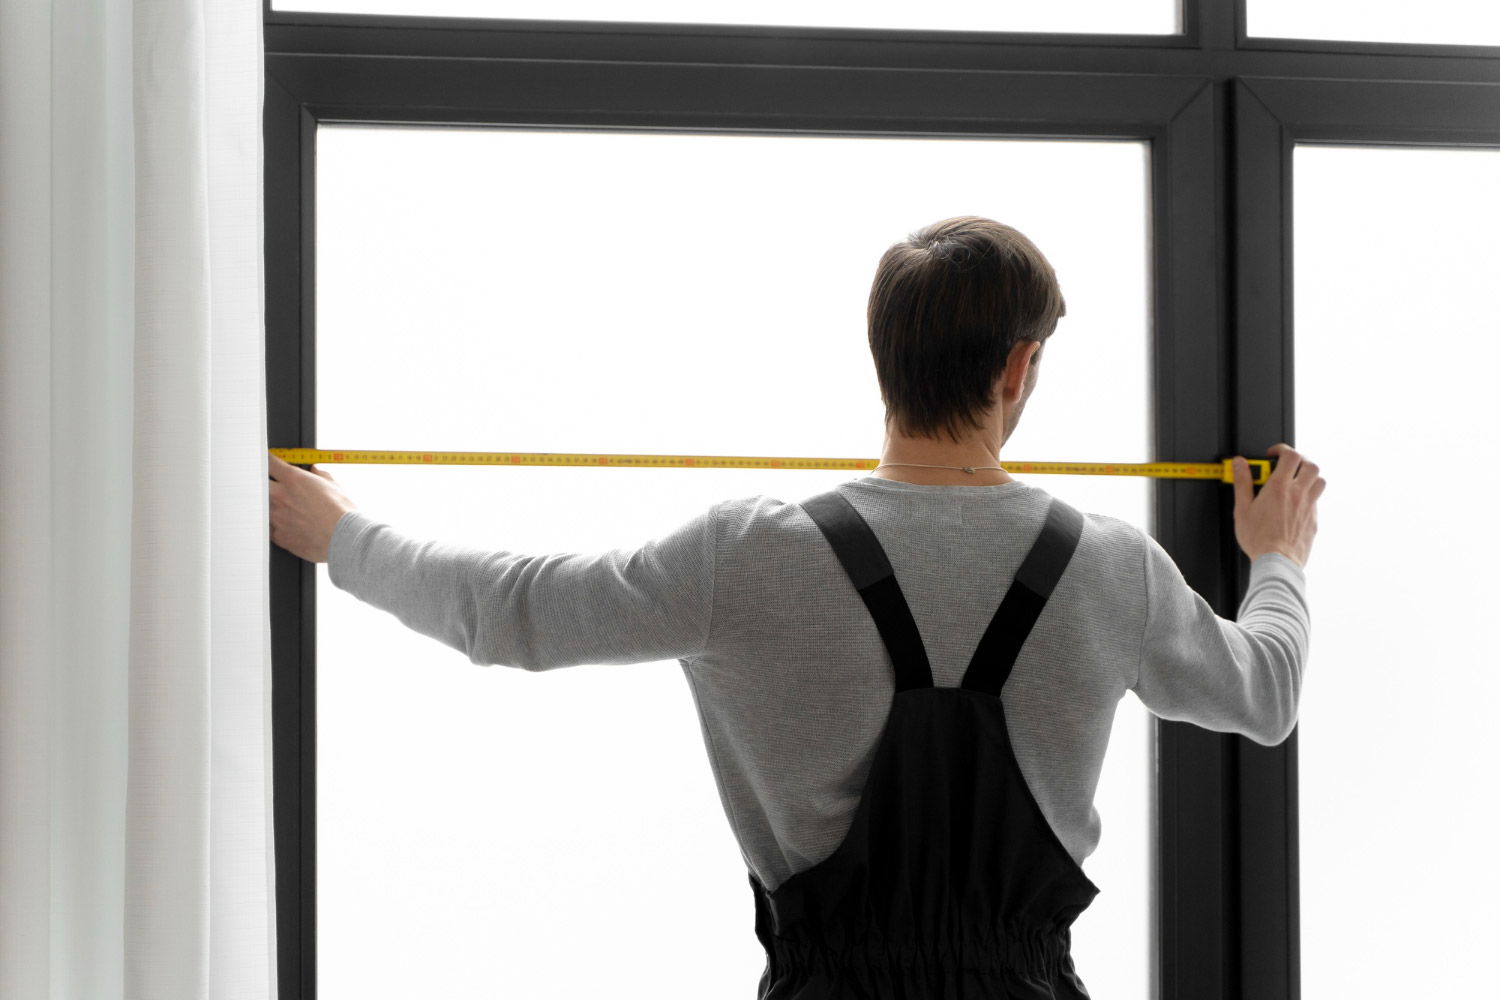 A man holding a measuring tape in front of a window.